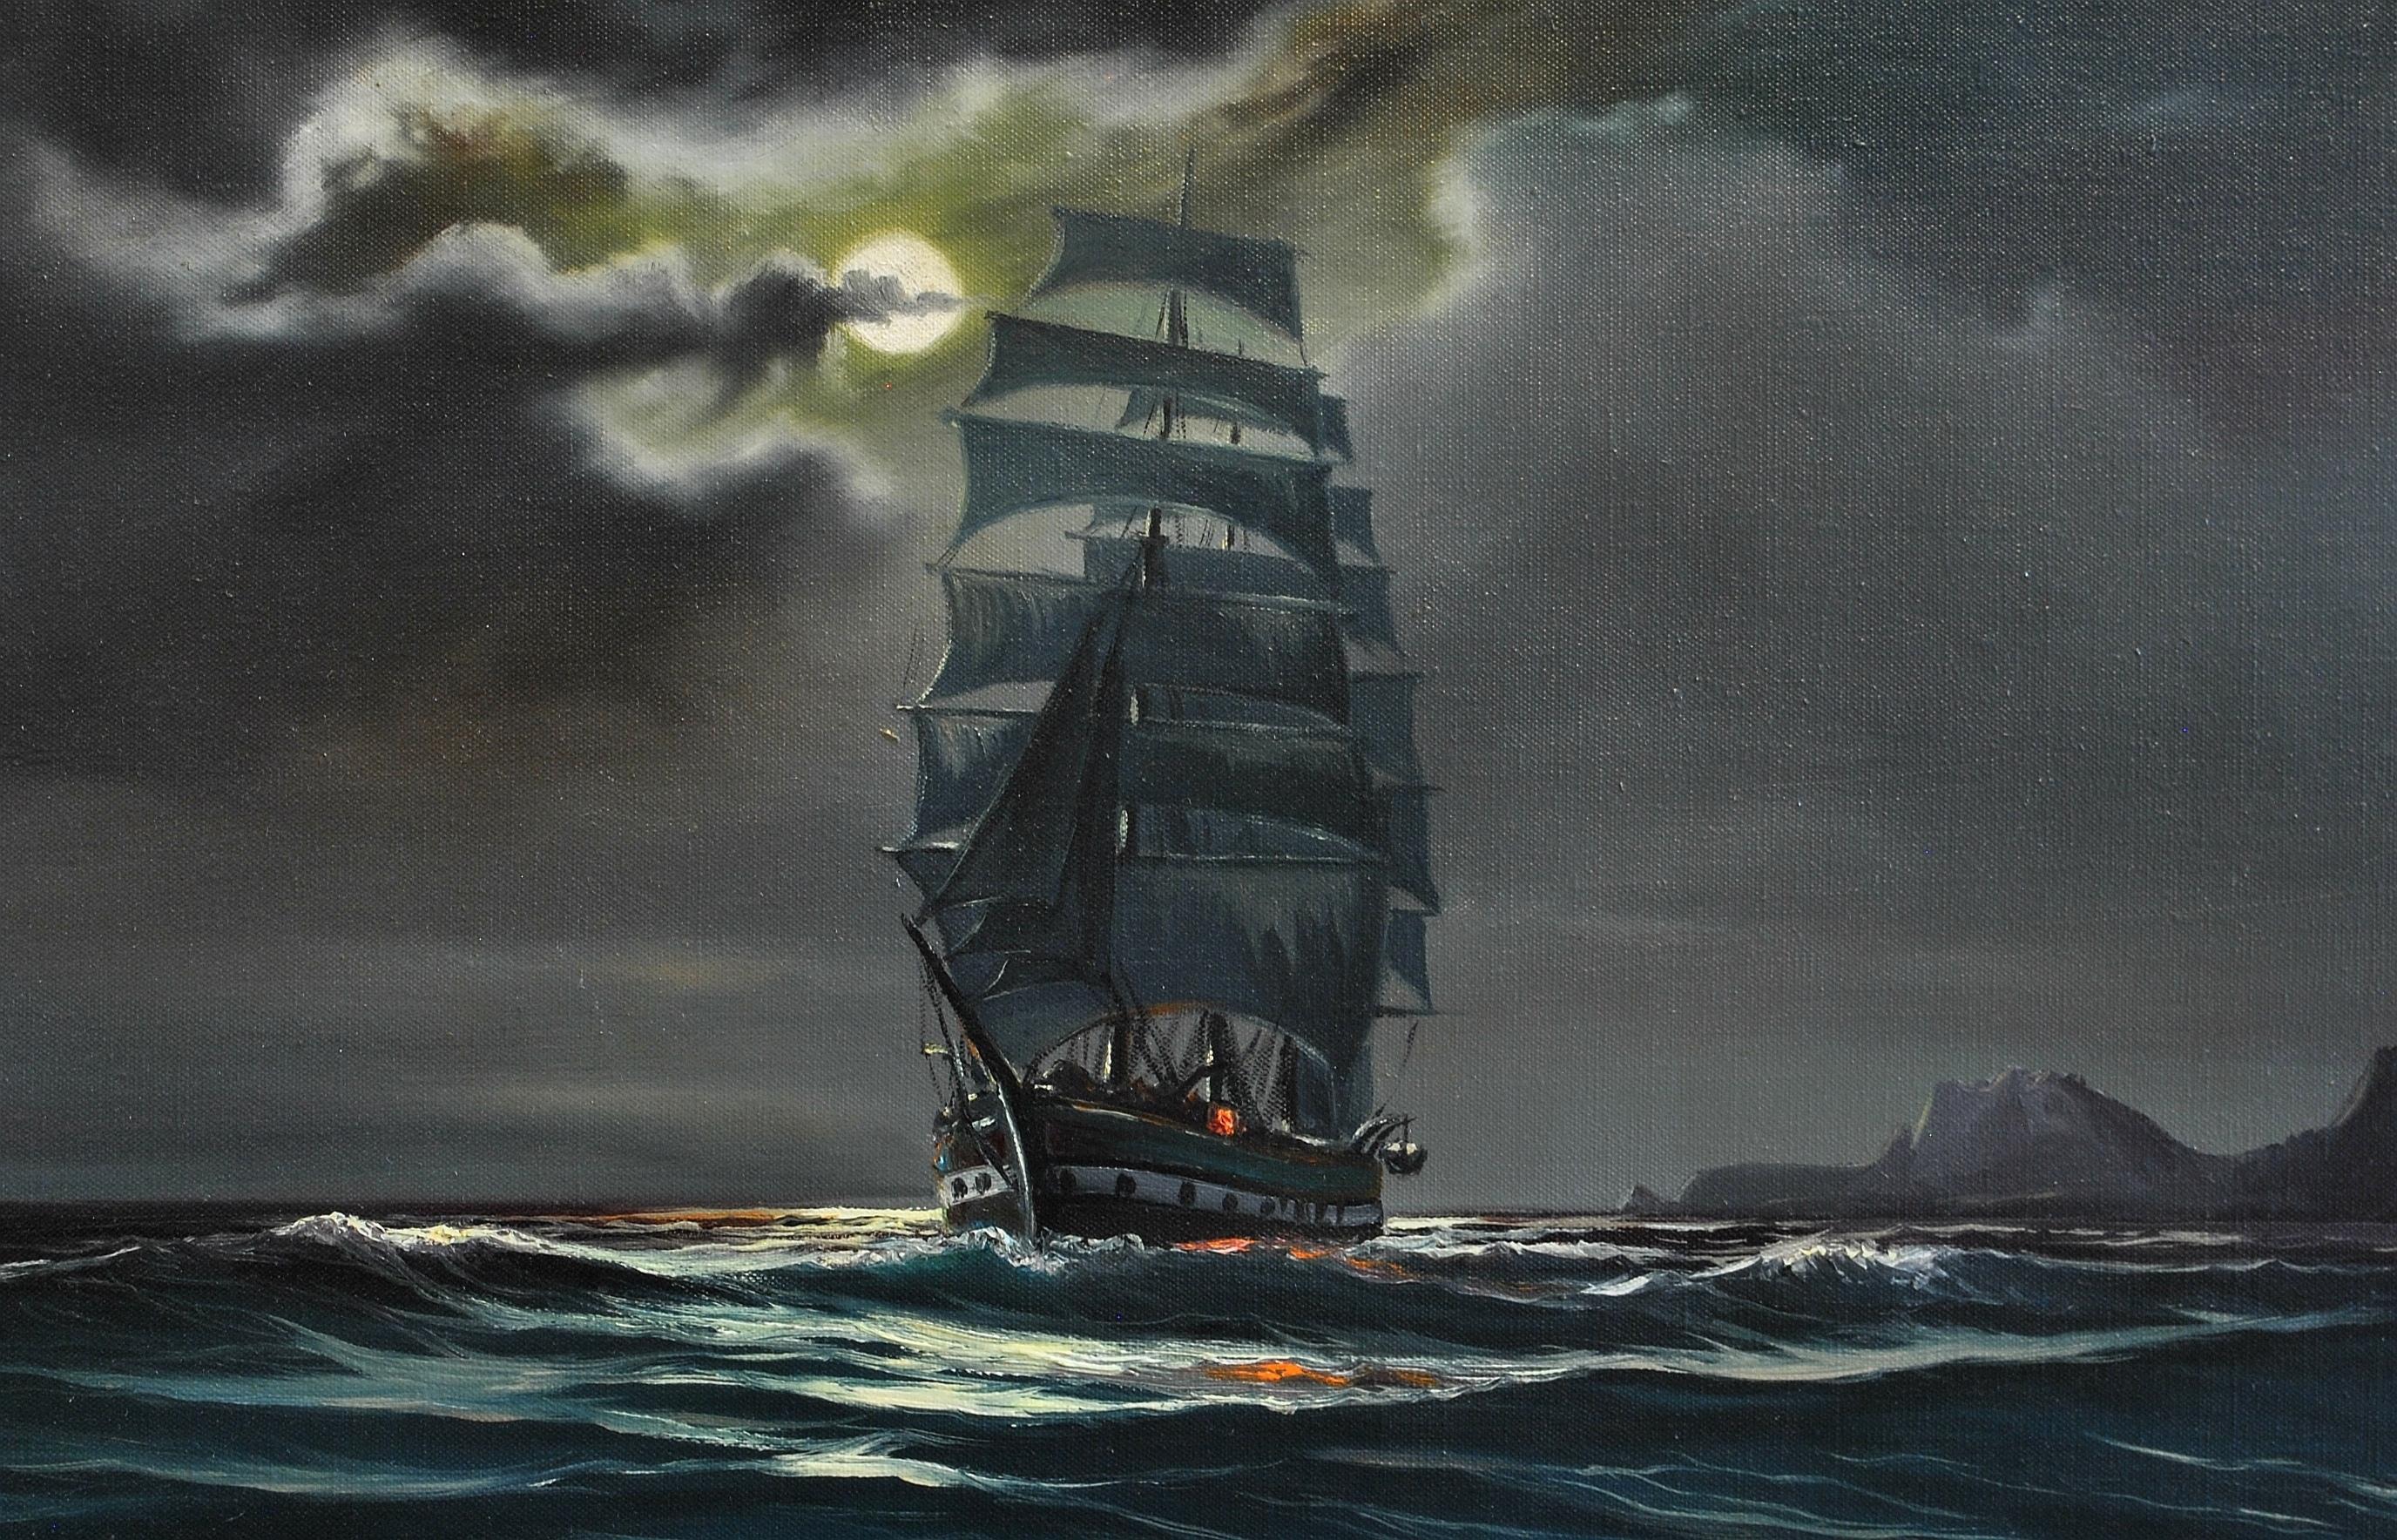 The Hesperus - Mid 20th Century Moonlit Seascape Oil on Canvas Ship Painting - Black Landscape Painting by Arnold Beardsley